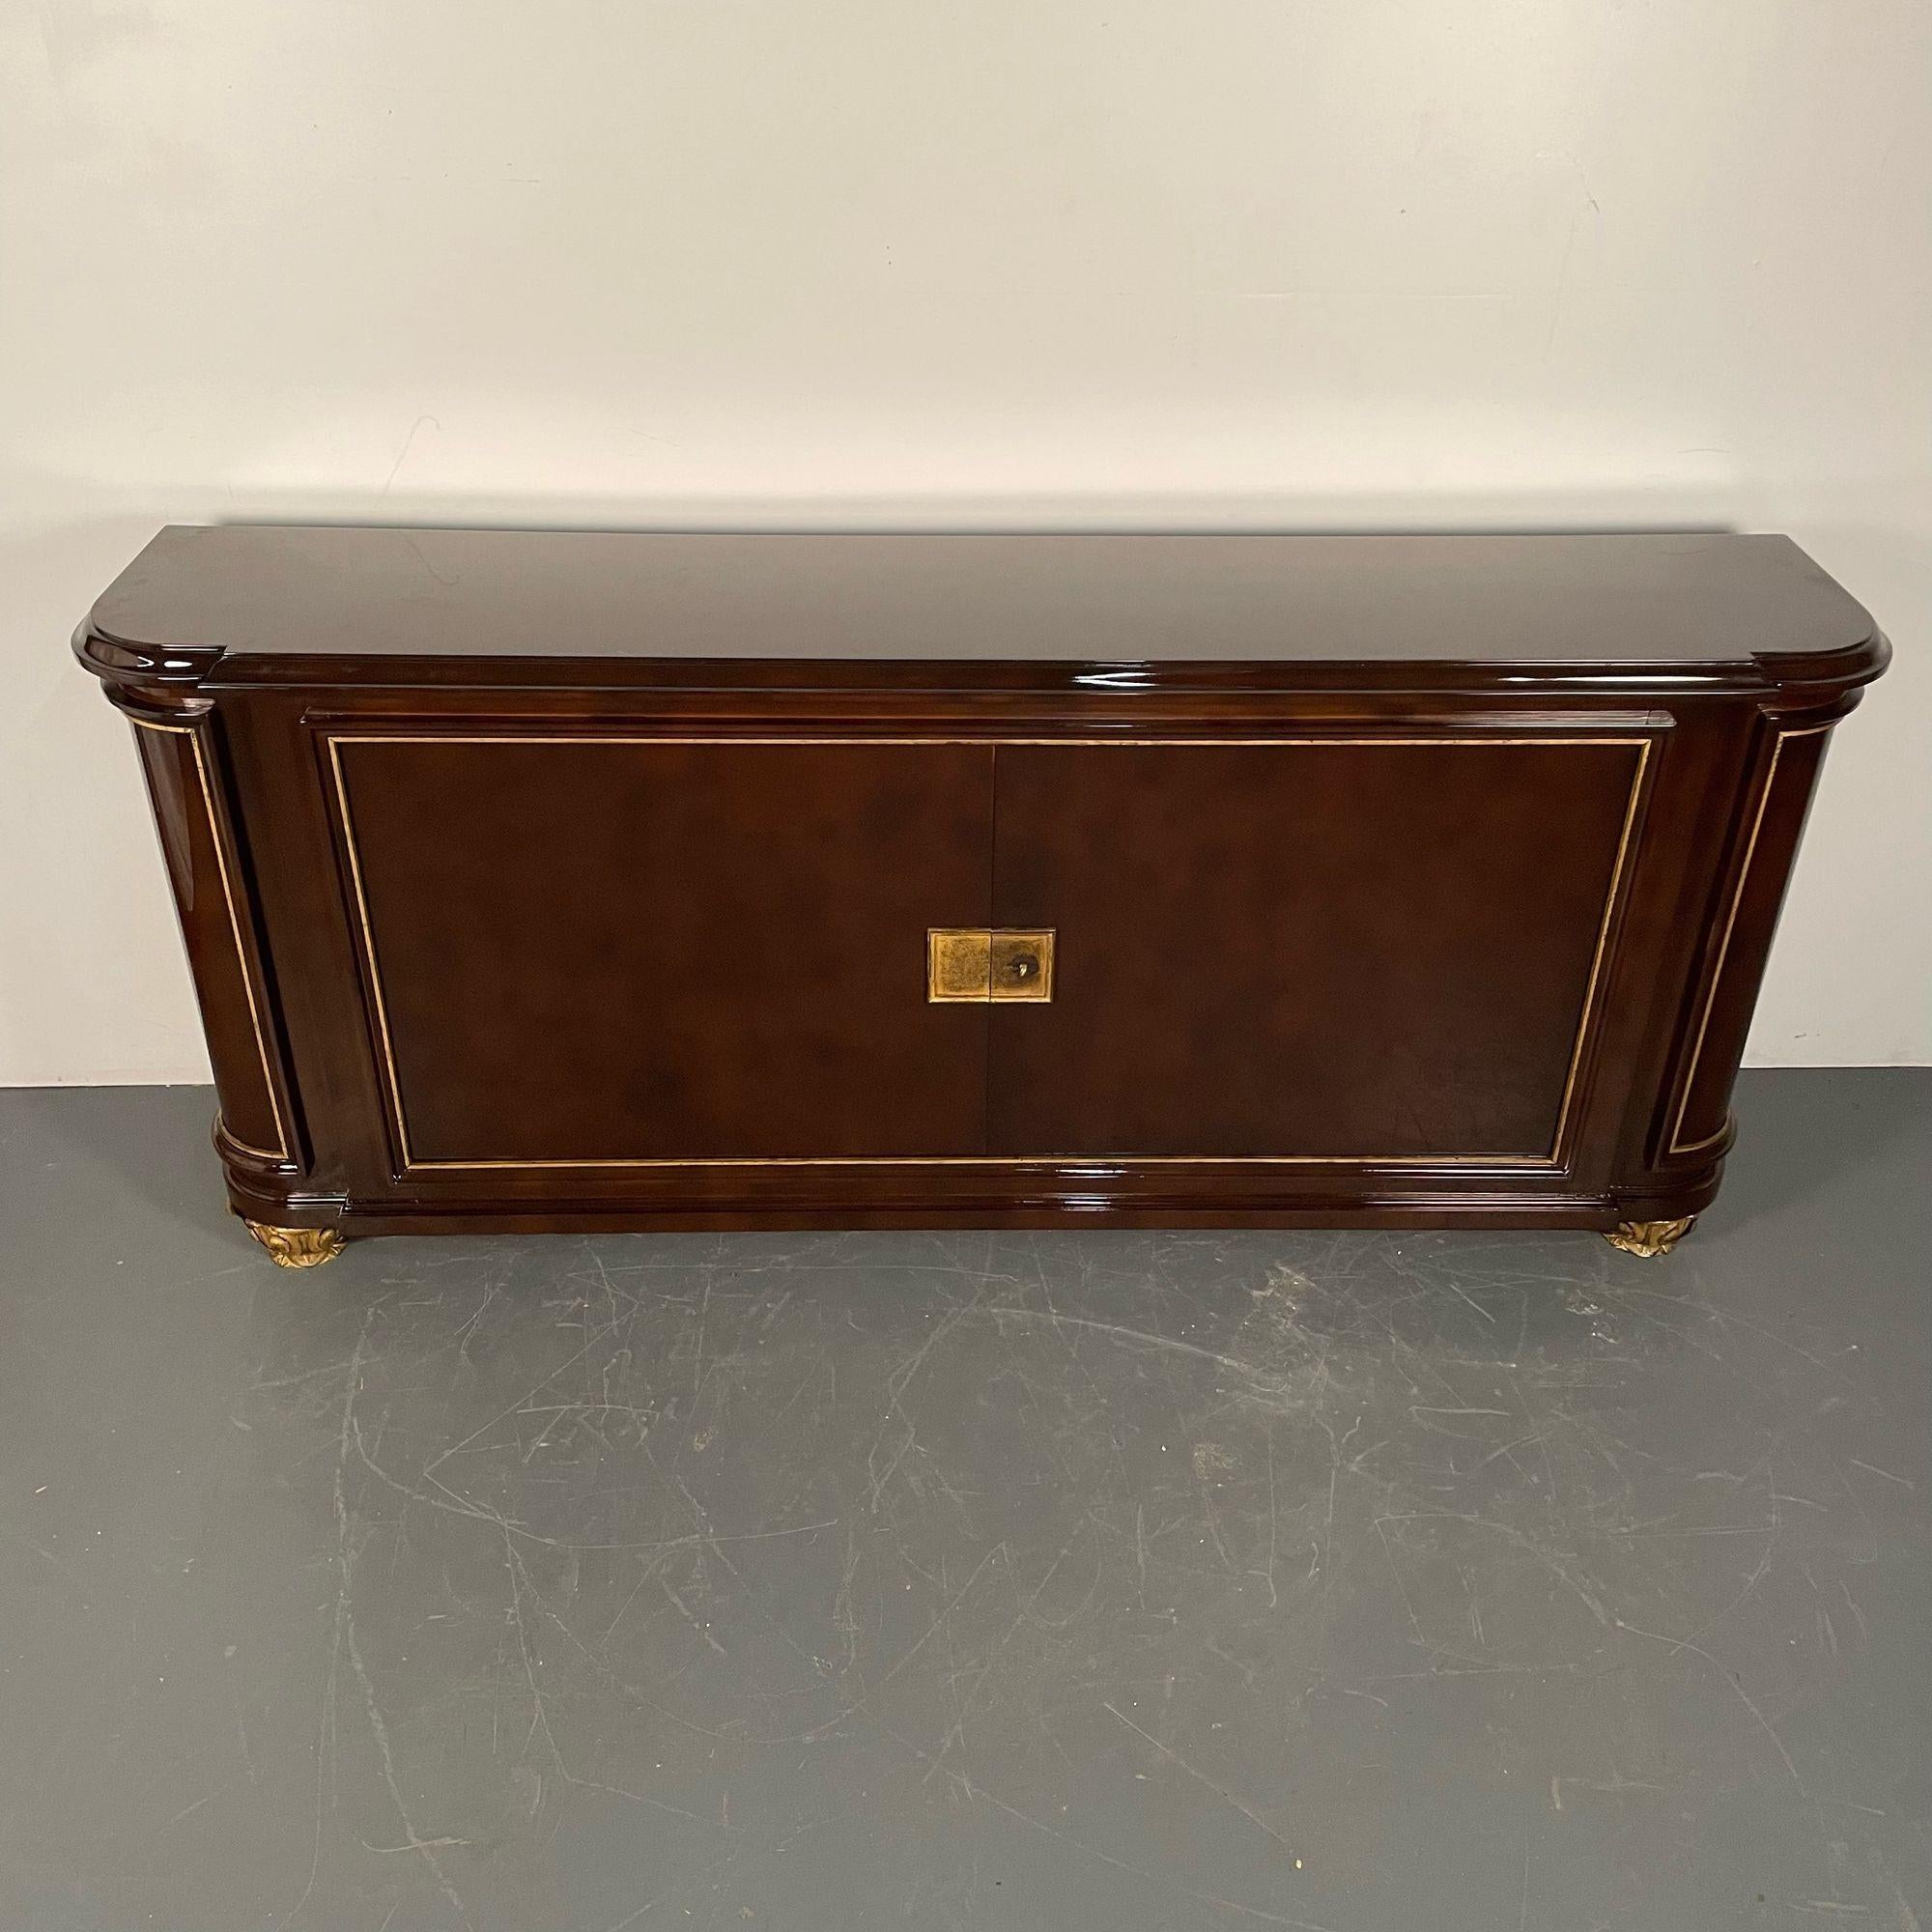 Mid-20th Century Rene Drouet, French Art Deco, Sideboard, Brown Lacquer, Gilt, France, 1940s For Sale